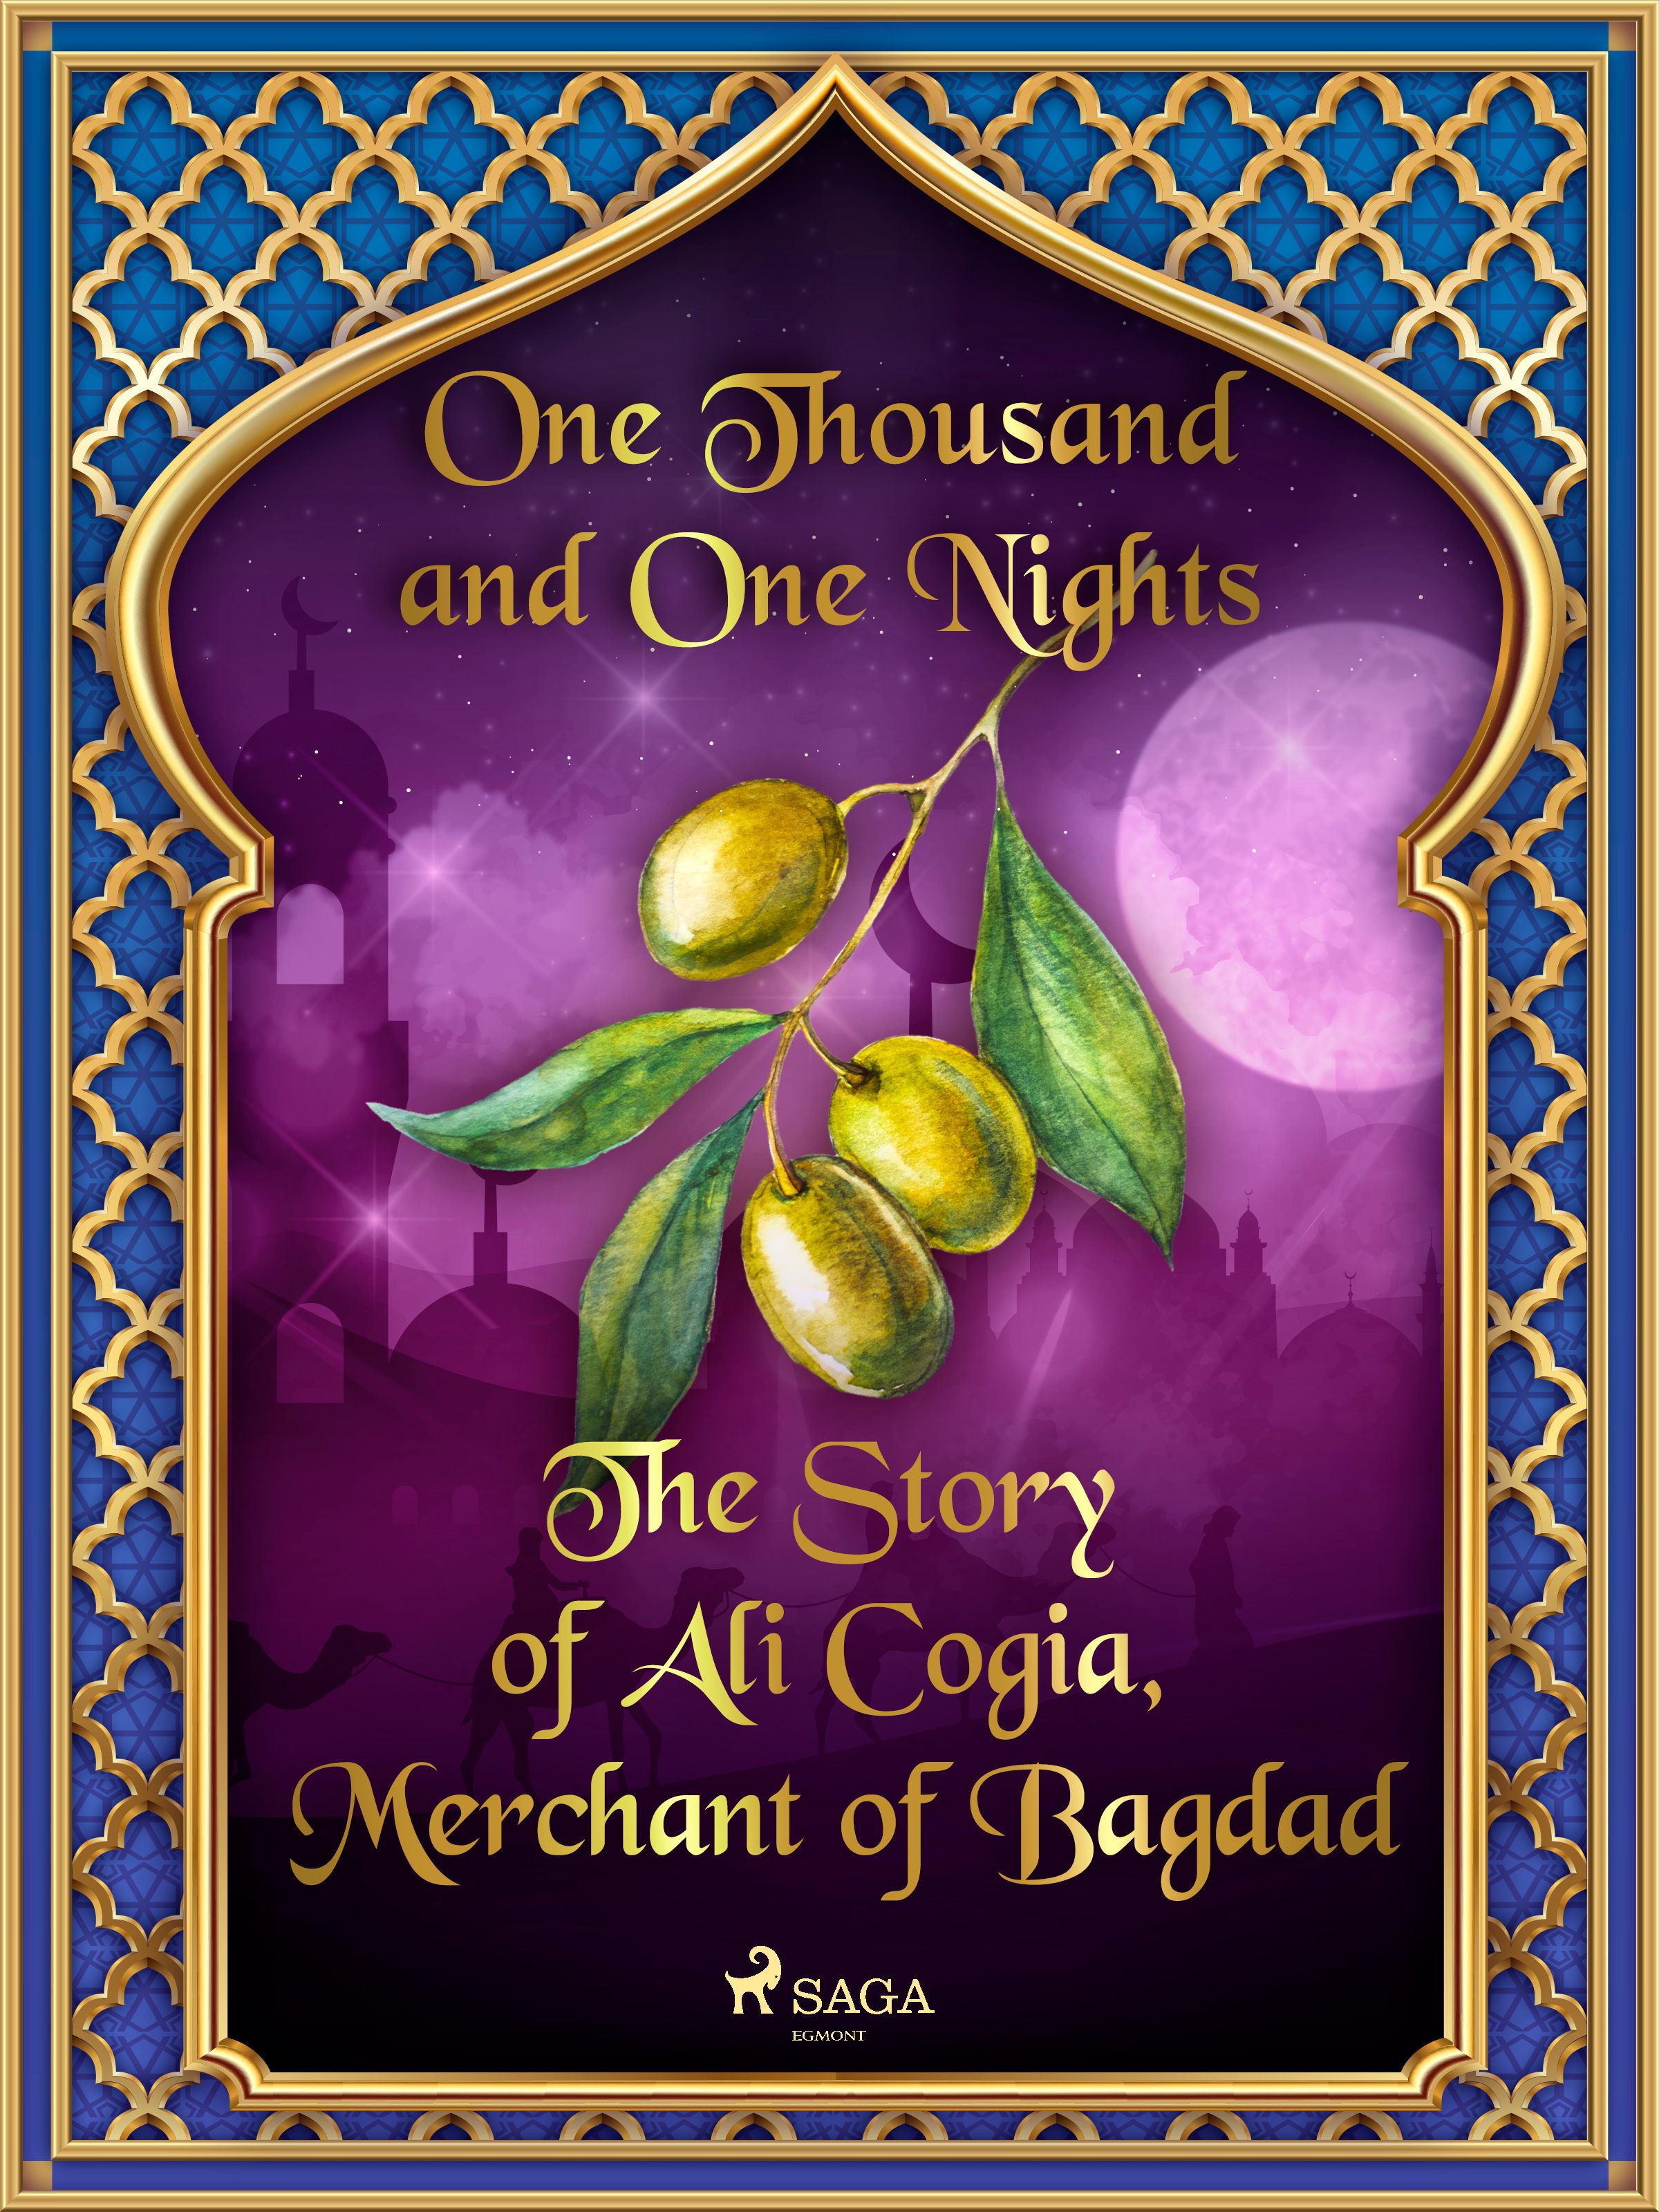 The Story of Ali Cogia, Merchant of Bagdad, eBook by One Thousand and One Nights